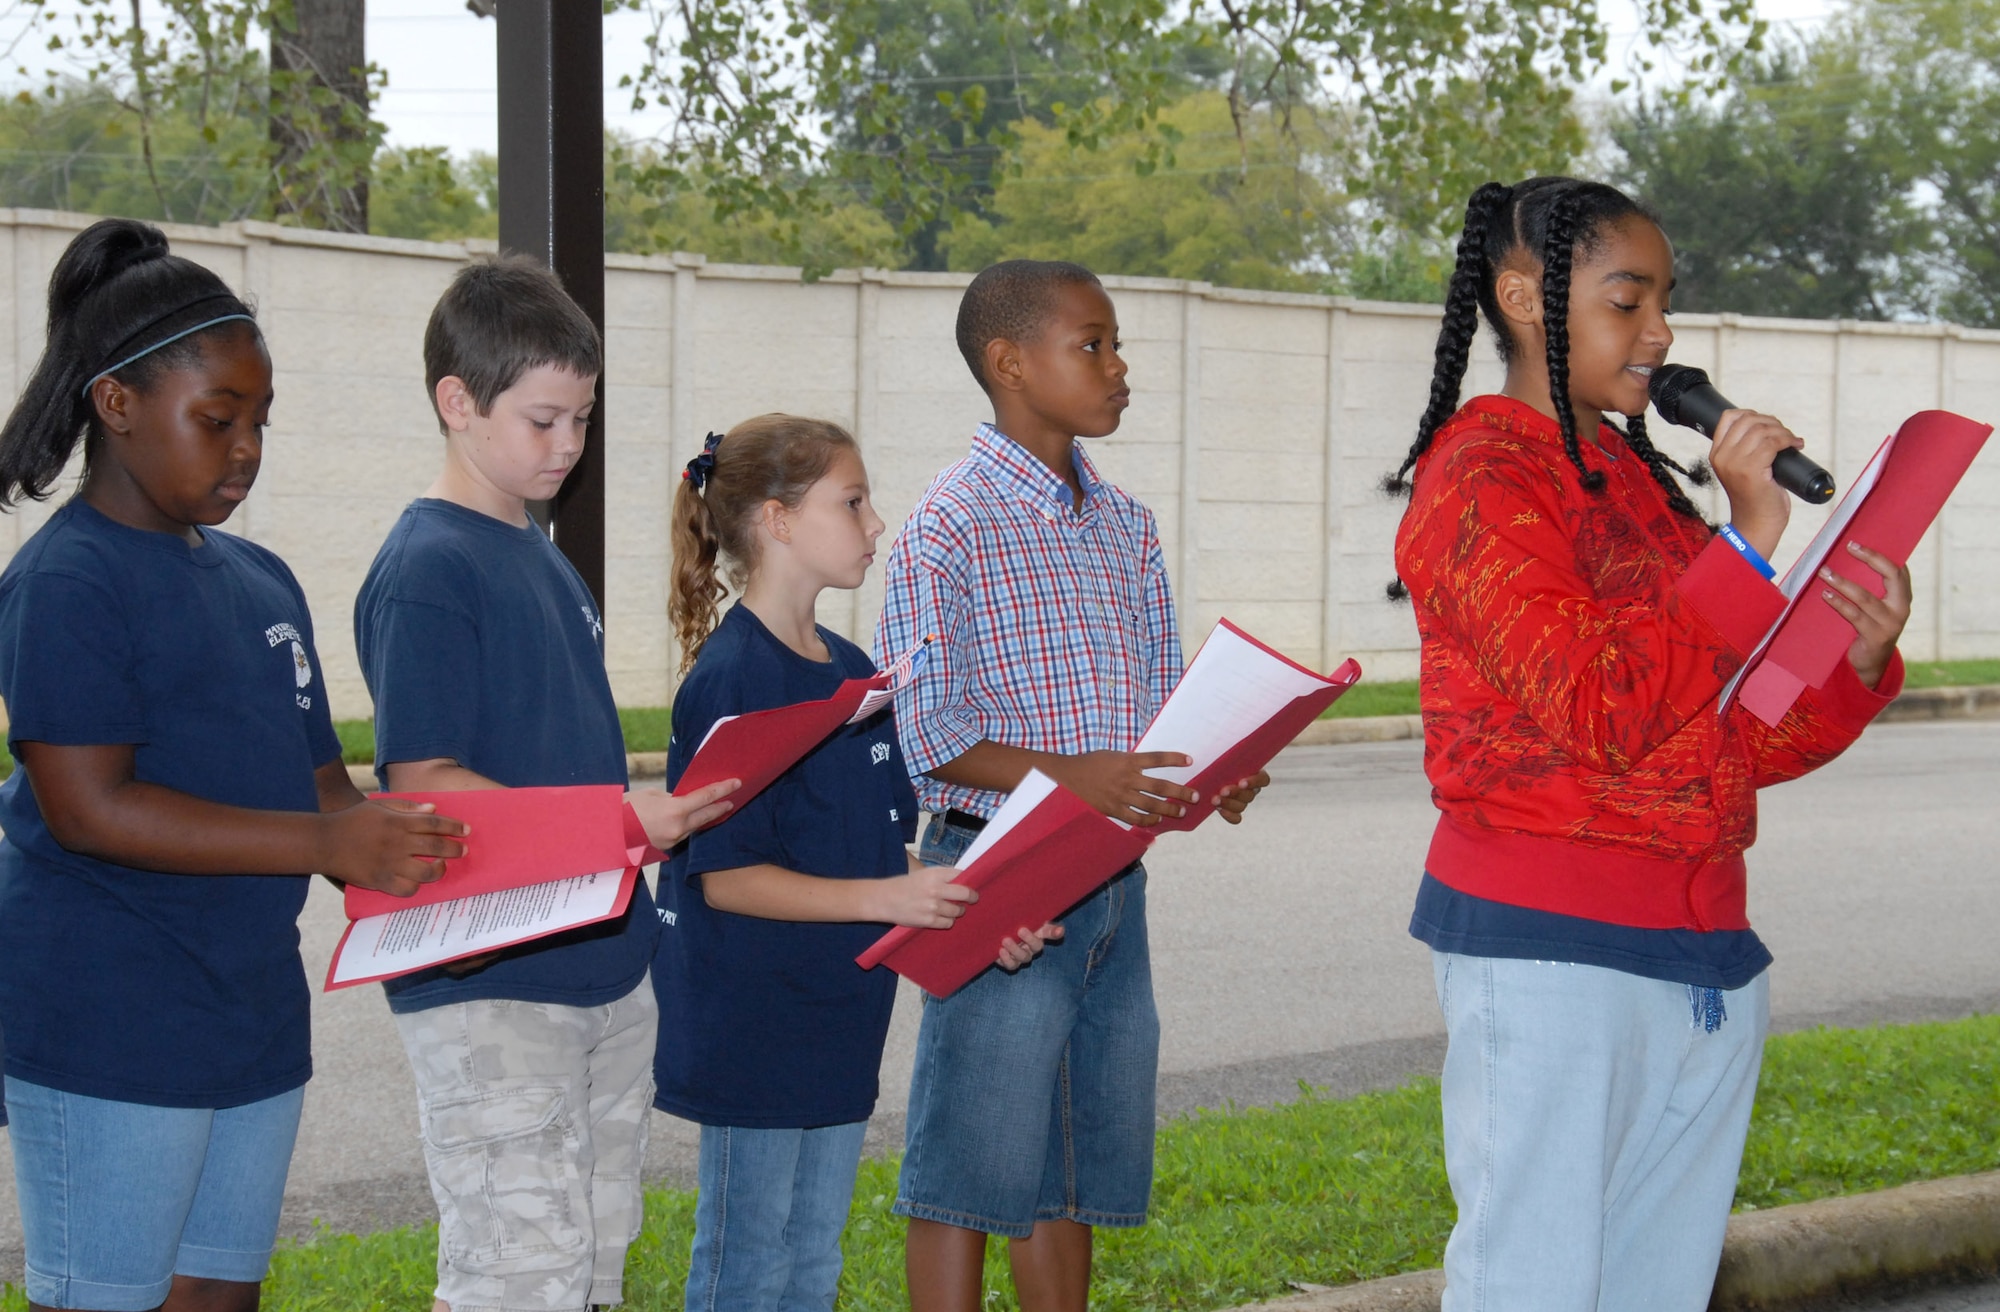 The Maxwell Elementary School held a special ceremony Sept. 11 to remember 9/11. At left are students taking part in the ceremony. They are (from left) D’Andrea Paterson, Michael Boster, Abby Stout, Jaylin Hammond and Micaiah Bulluck. (U.S. Air Force photo/Bud Hancock) 
